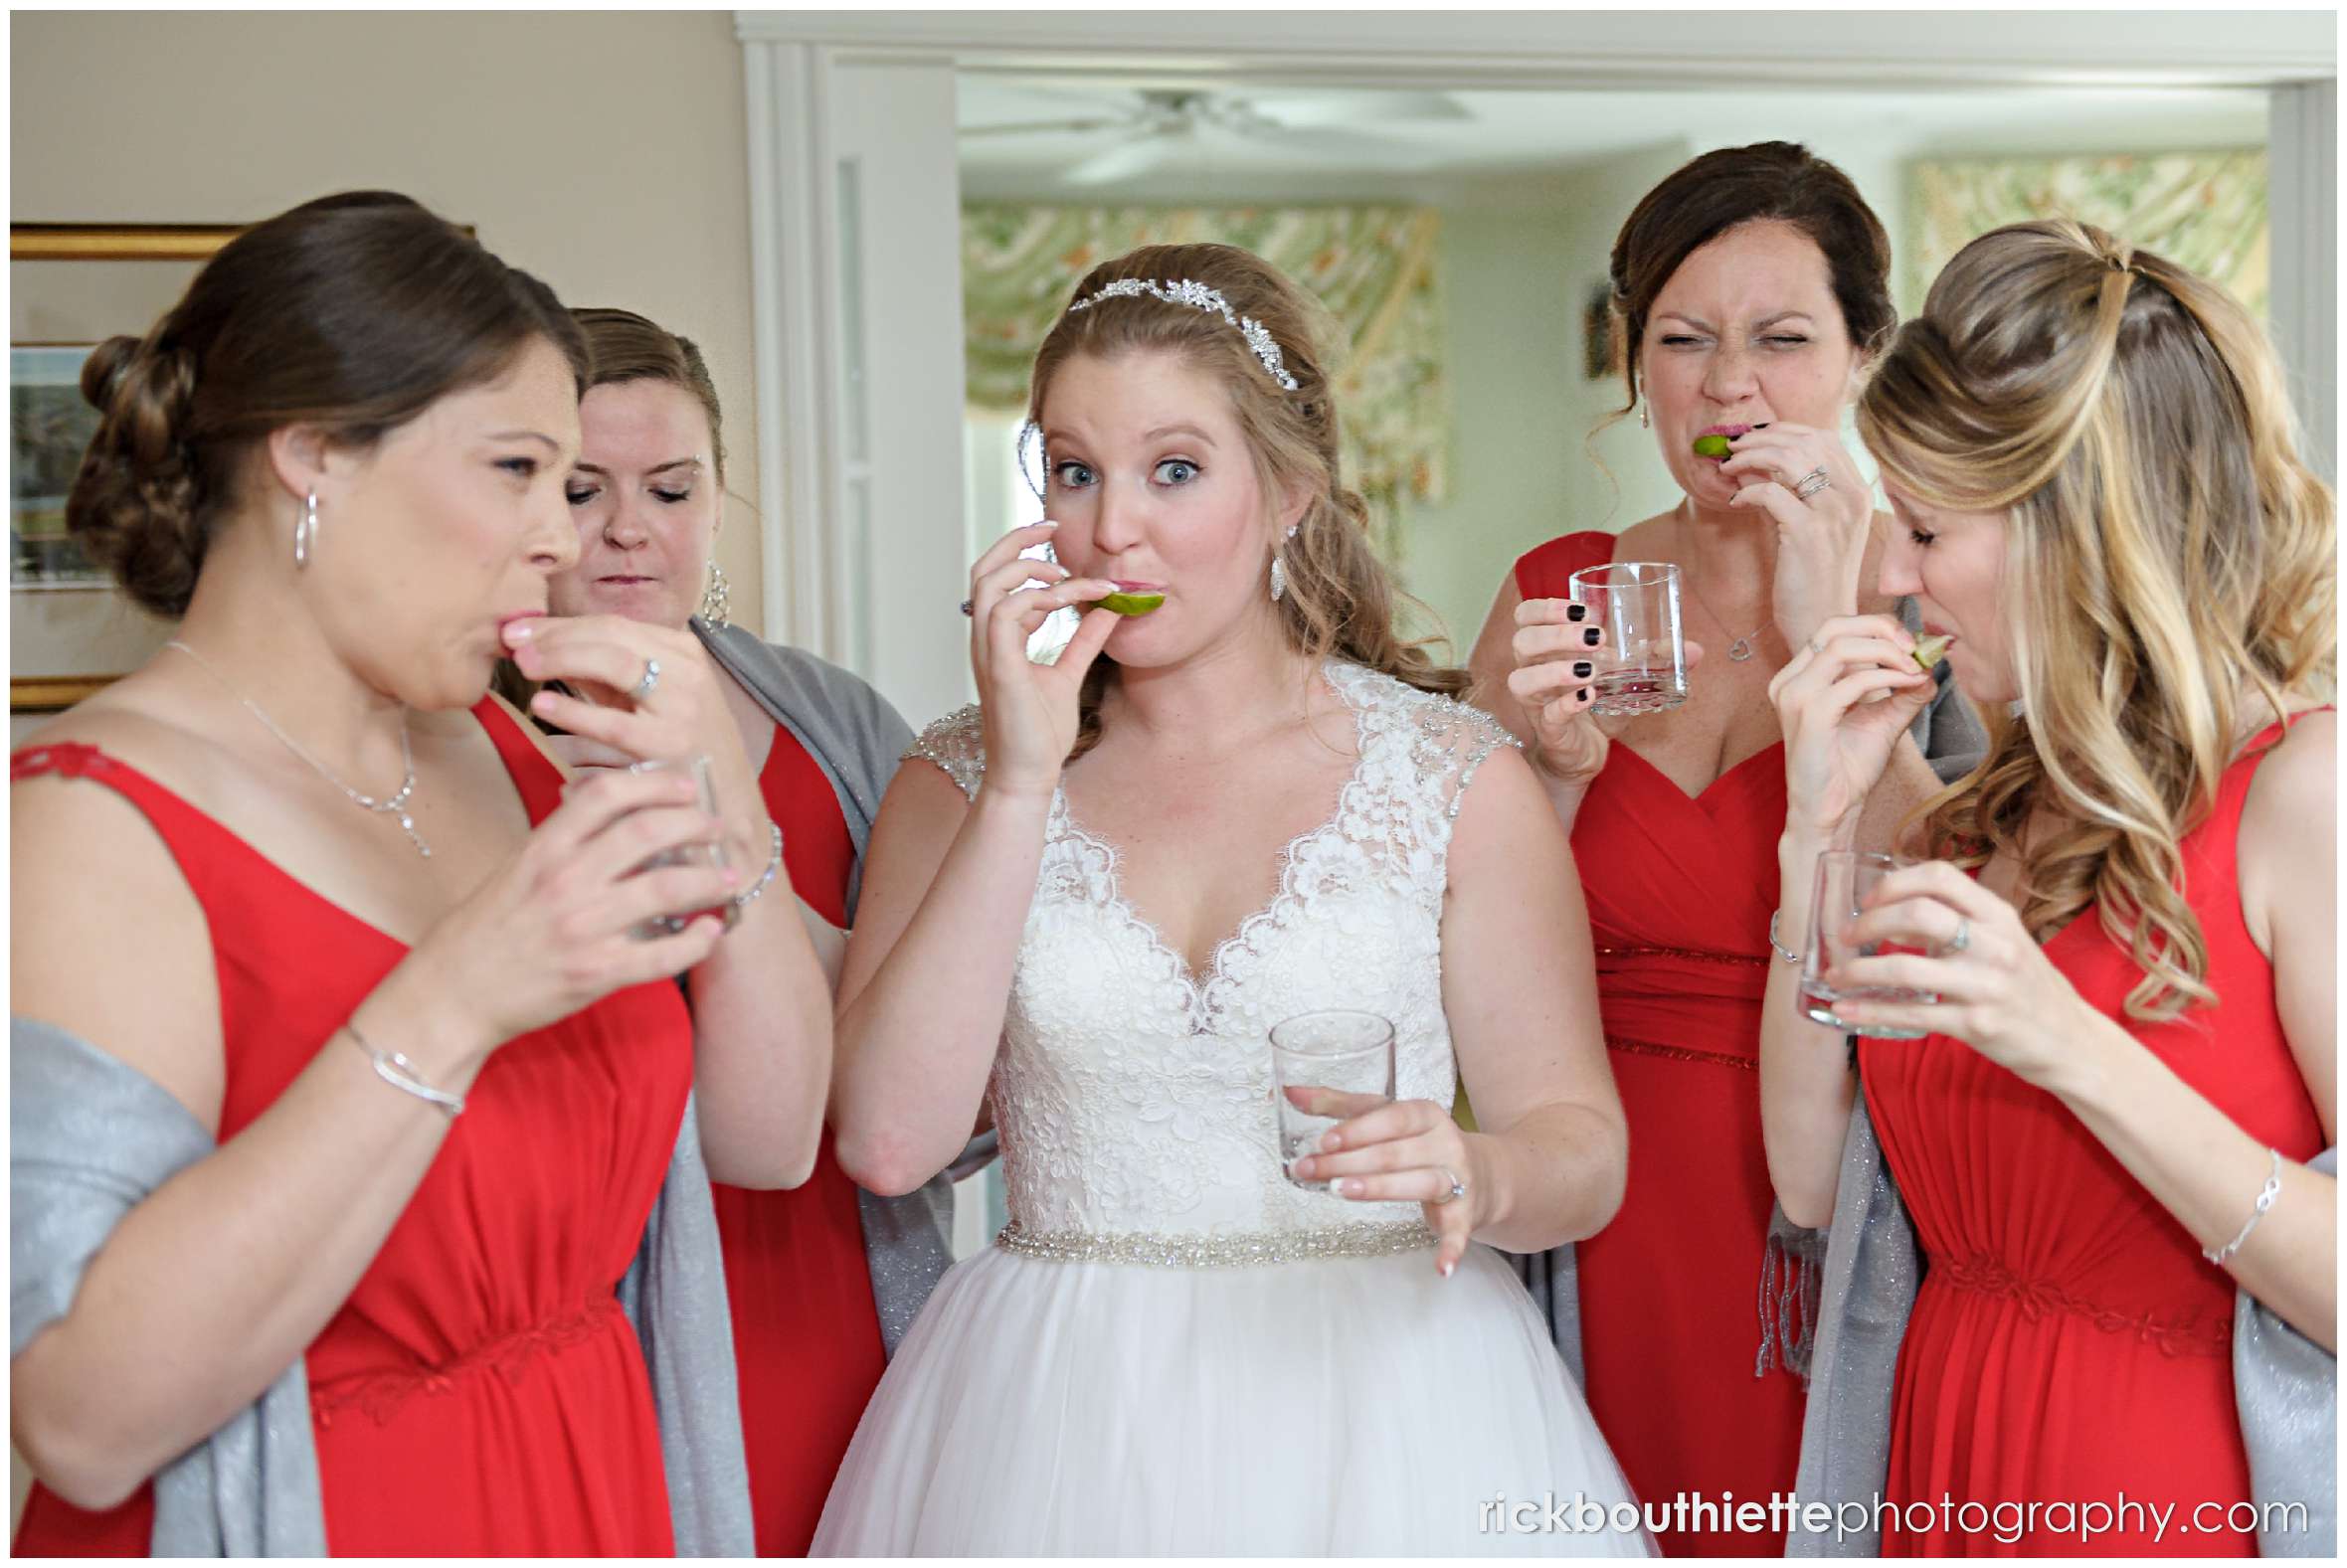 the bride and her bridesmaids enjoy a shot of tequila before her wedding ceremony at the mountain view grand resort